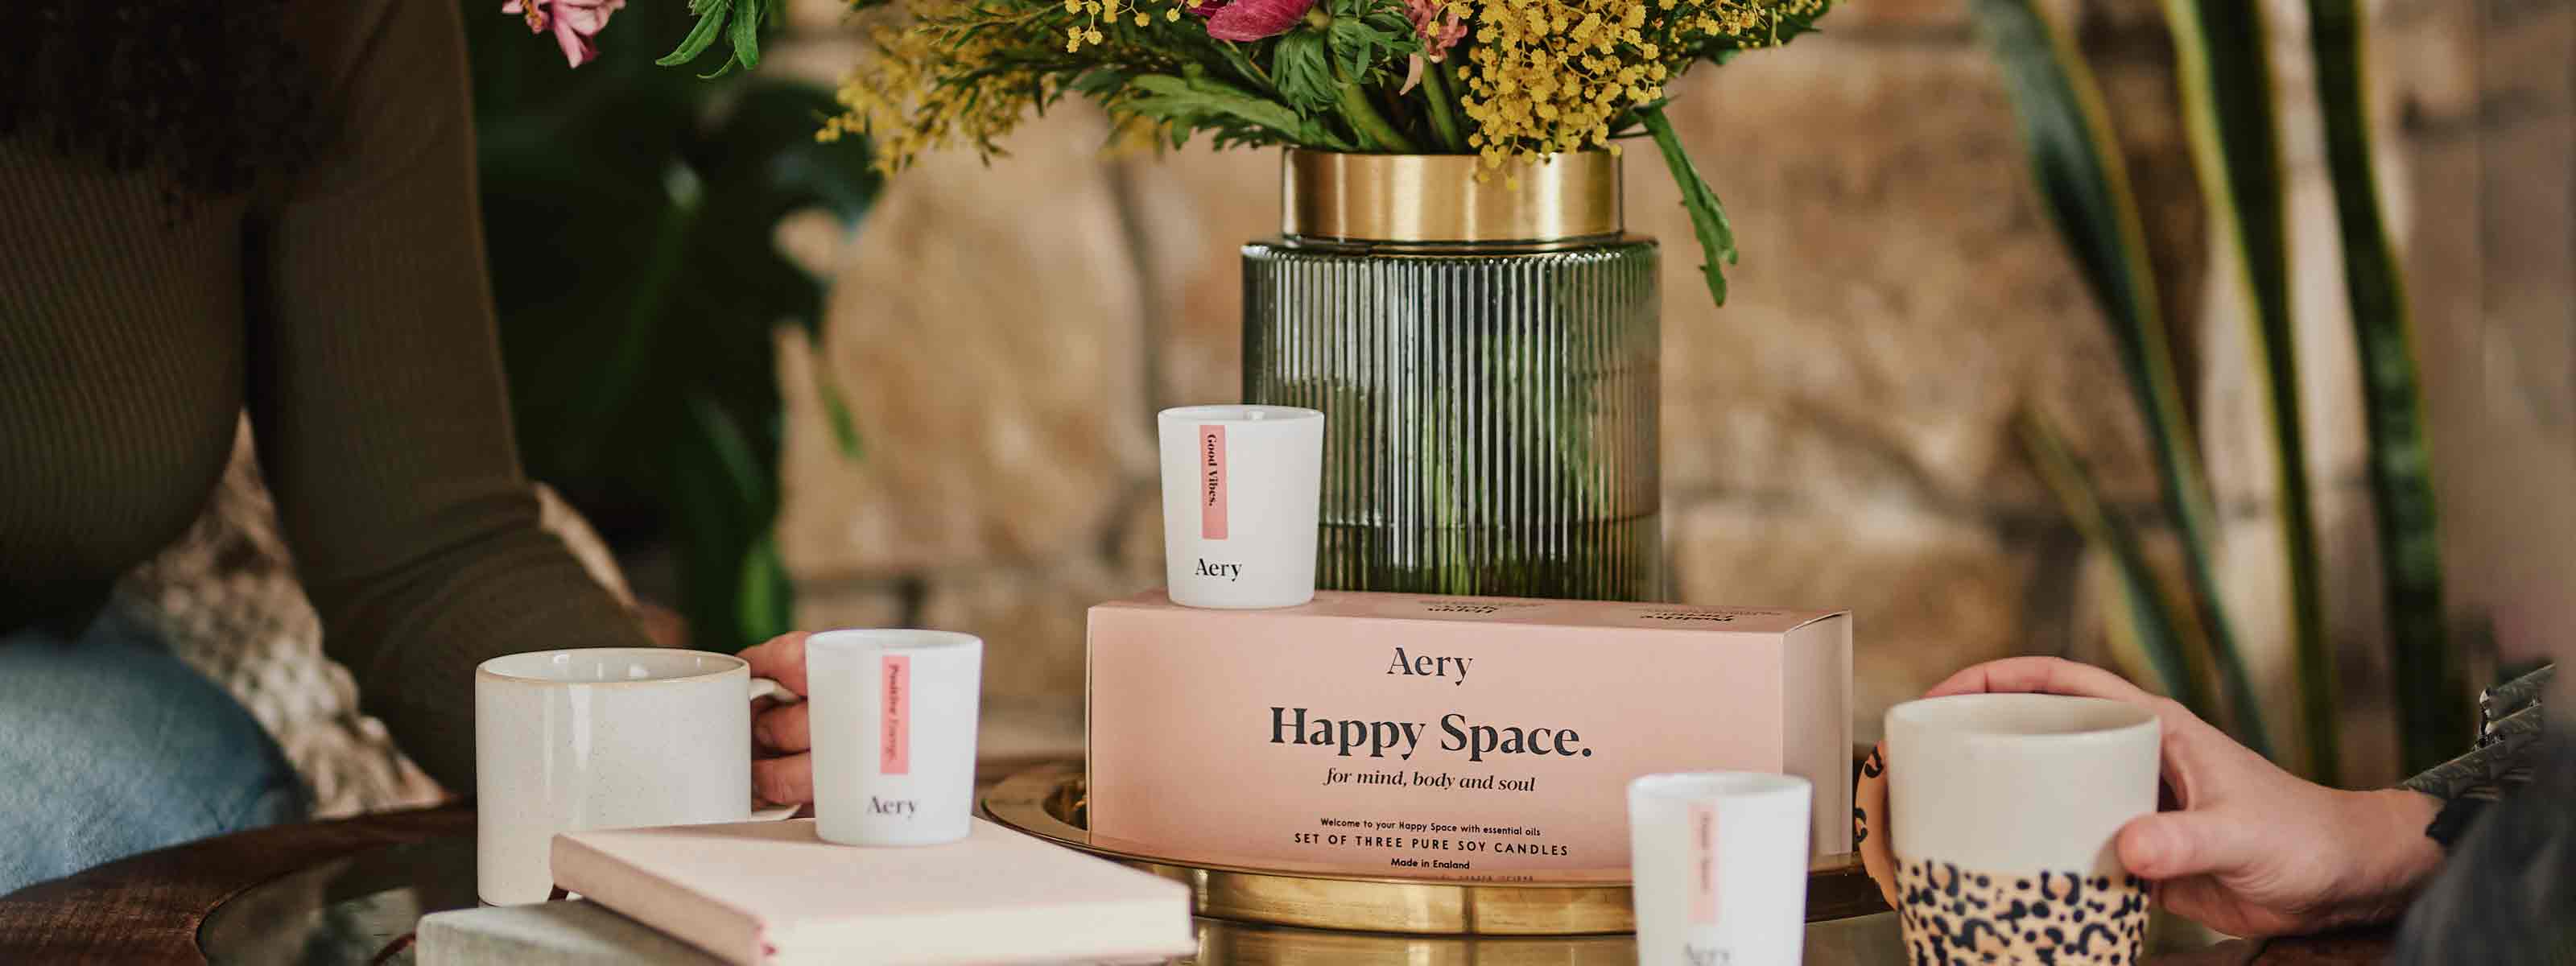 aery living happy space candle gift set next to pink product packaging and bunch of flowers